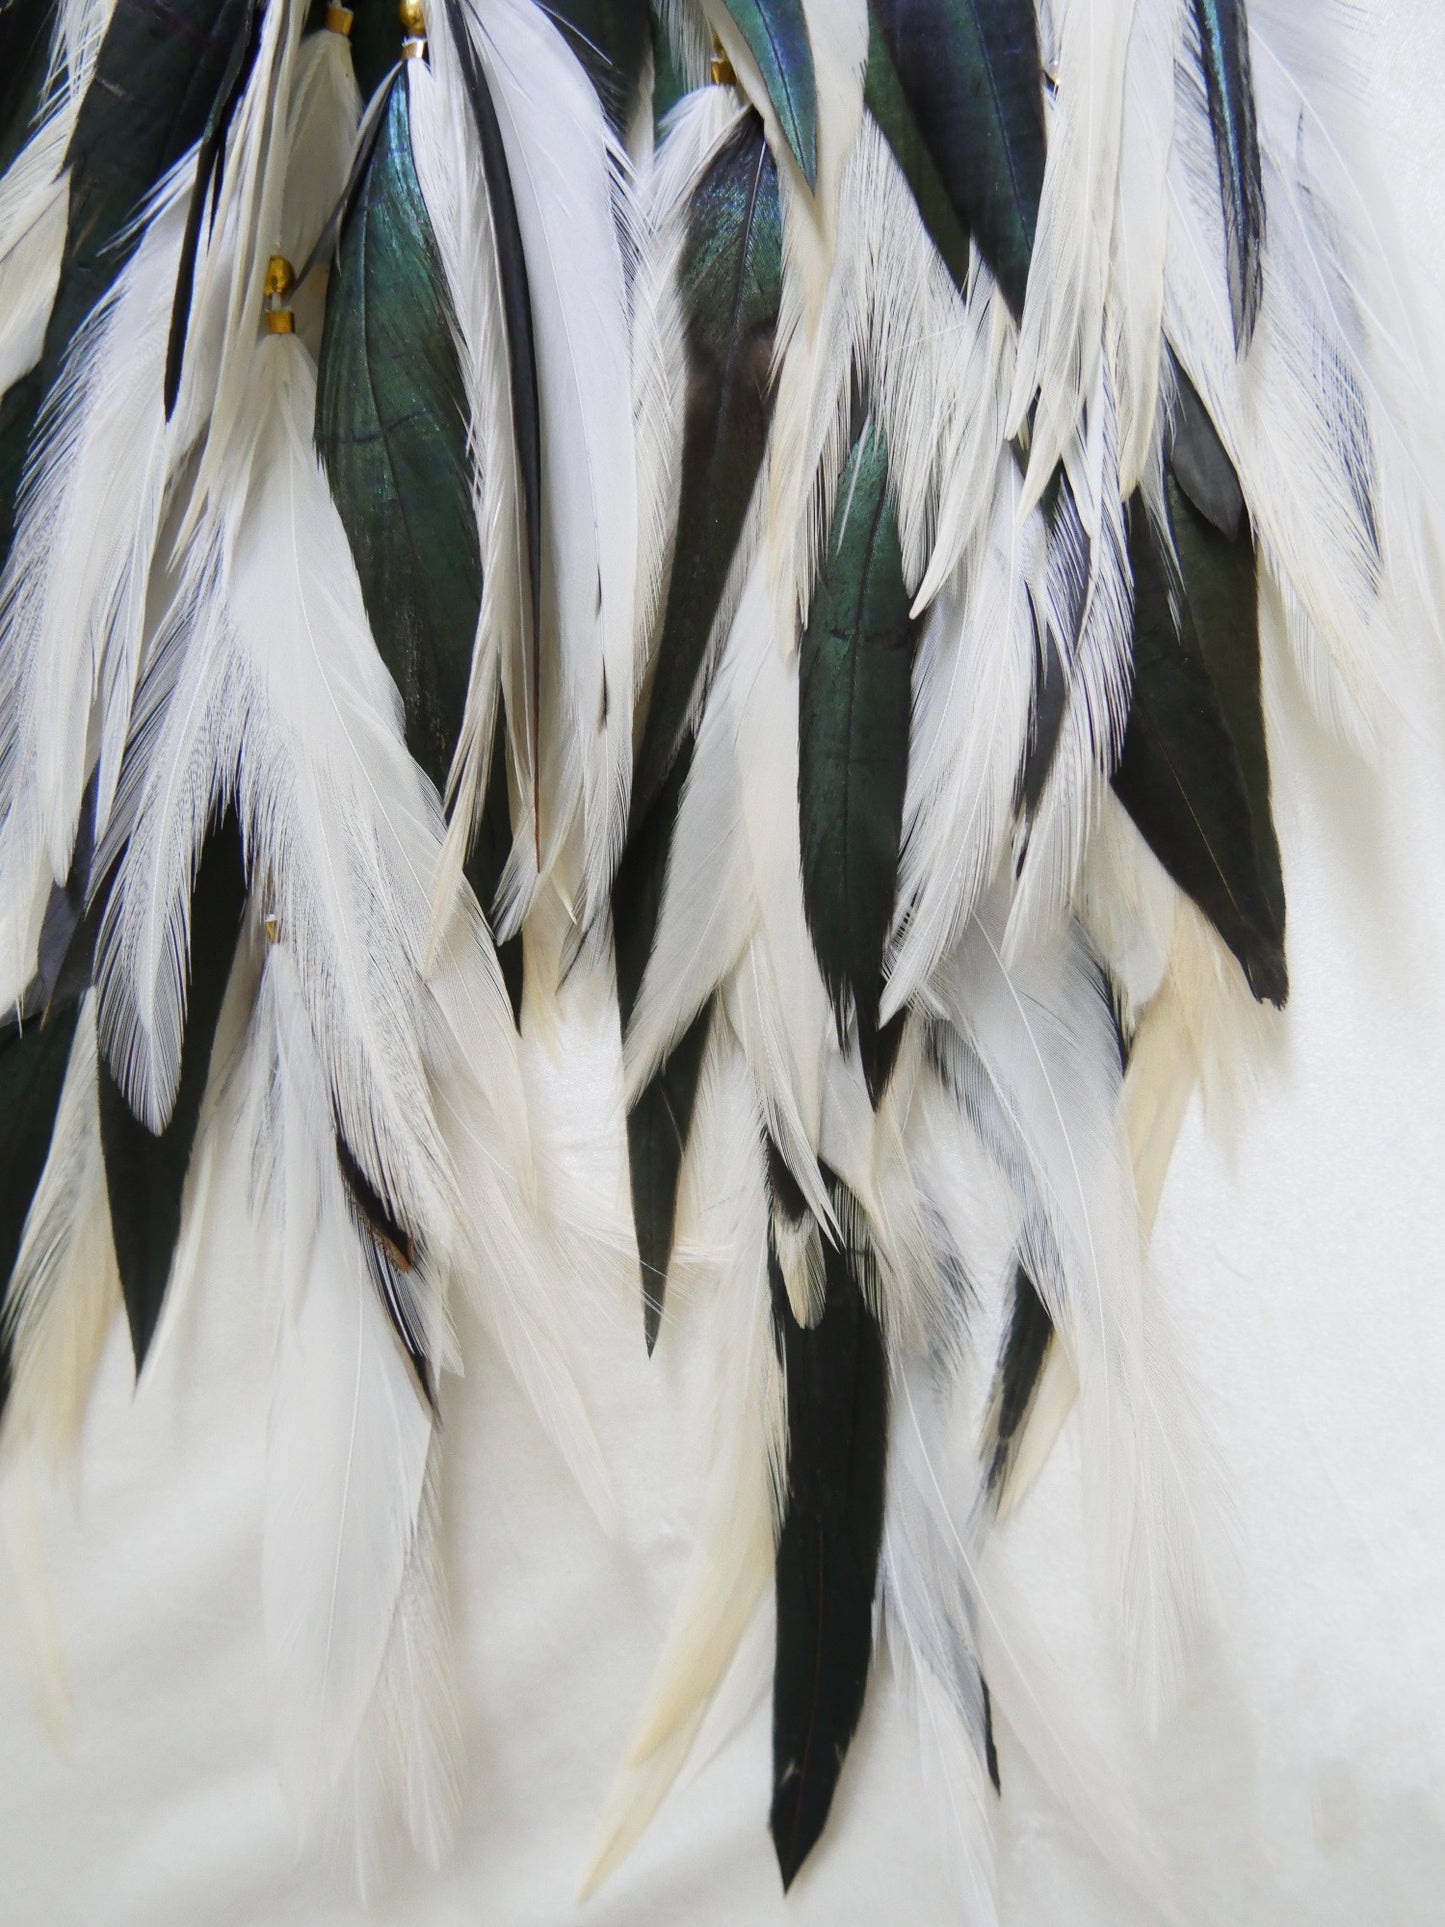 Bohemian Goddess long feather earrings with white and emerald green feathers, green quartz crystals.